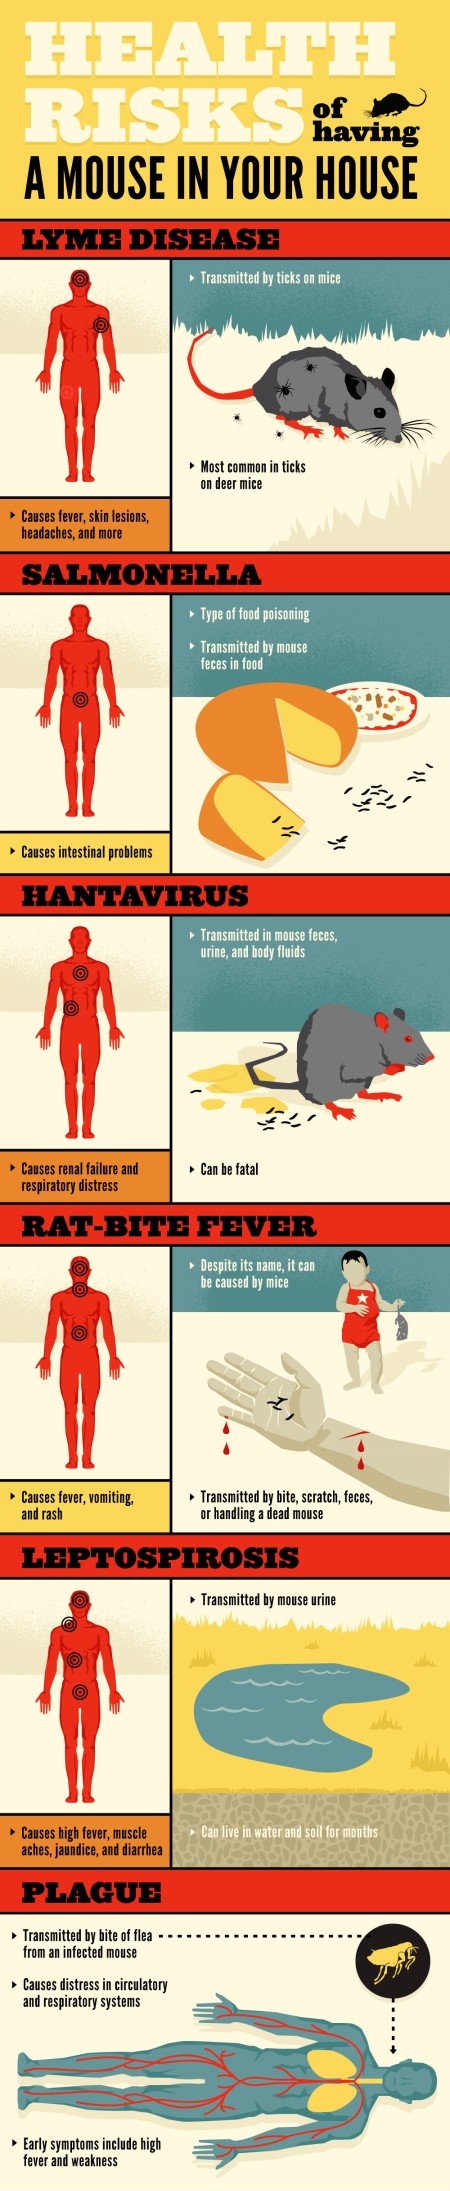 mice control manchester health risk infographic